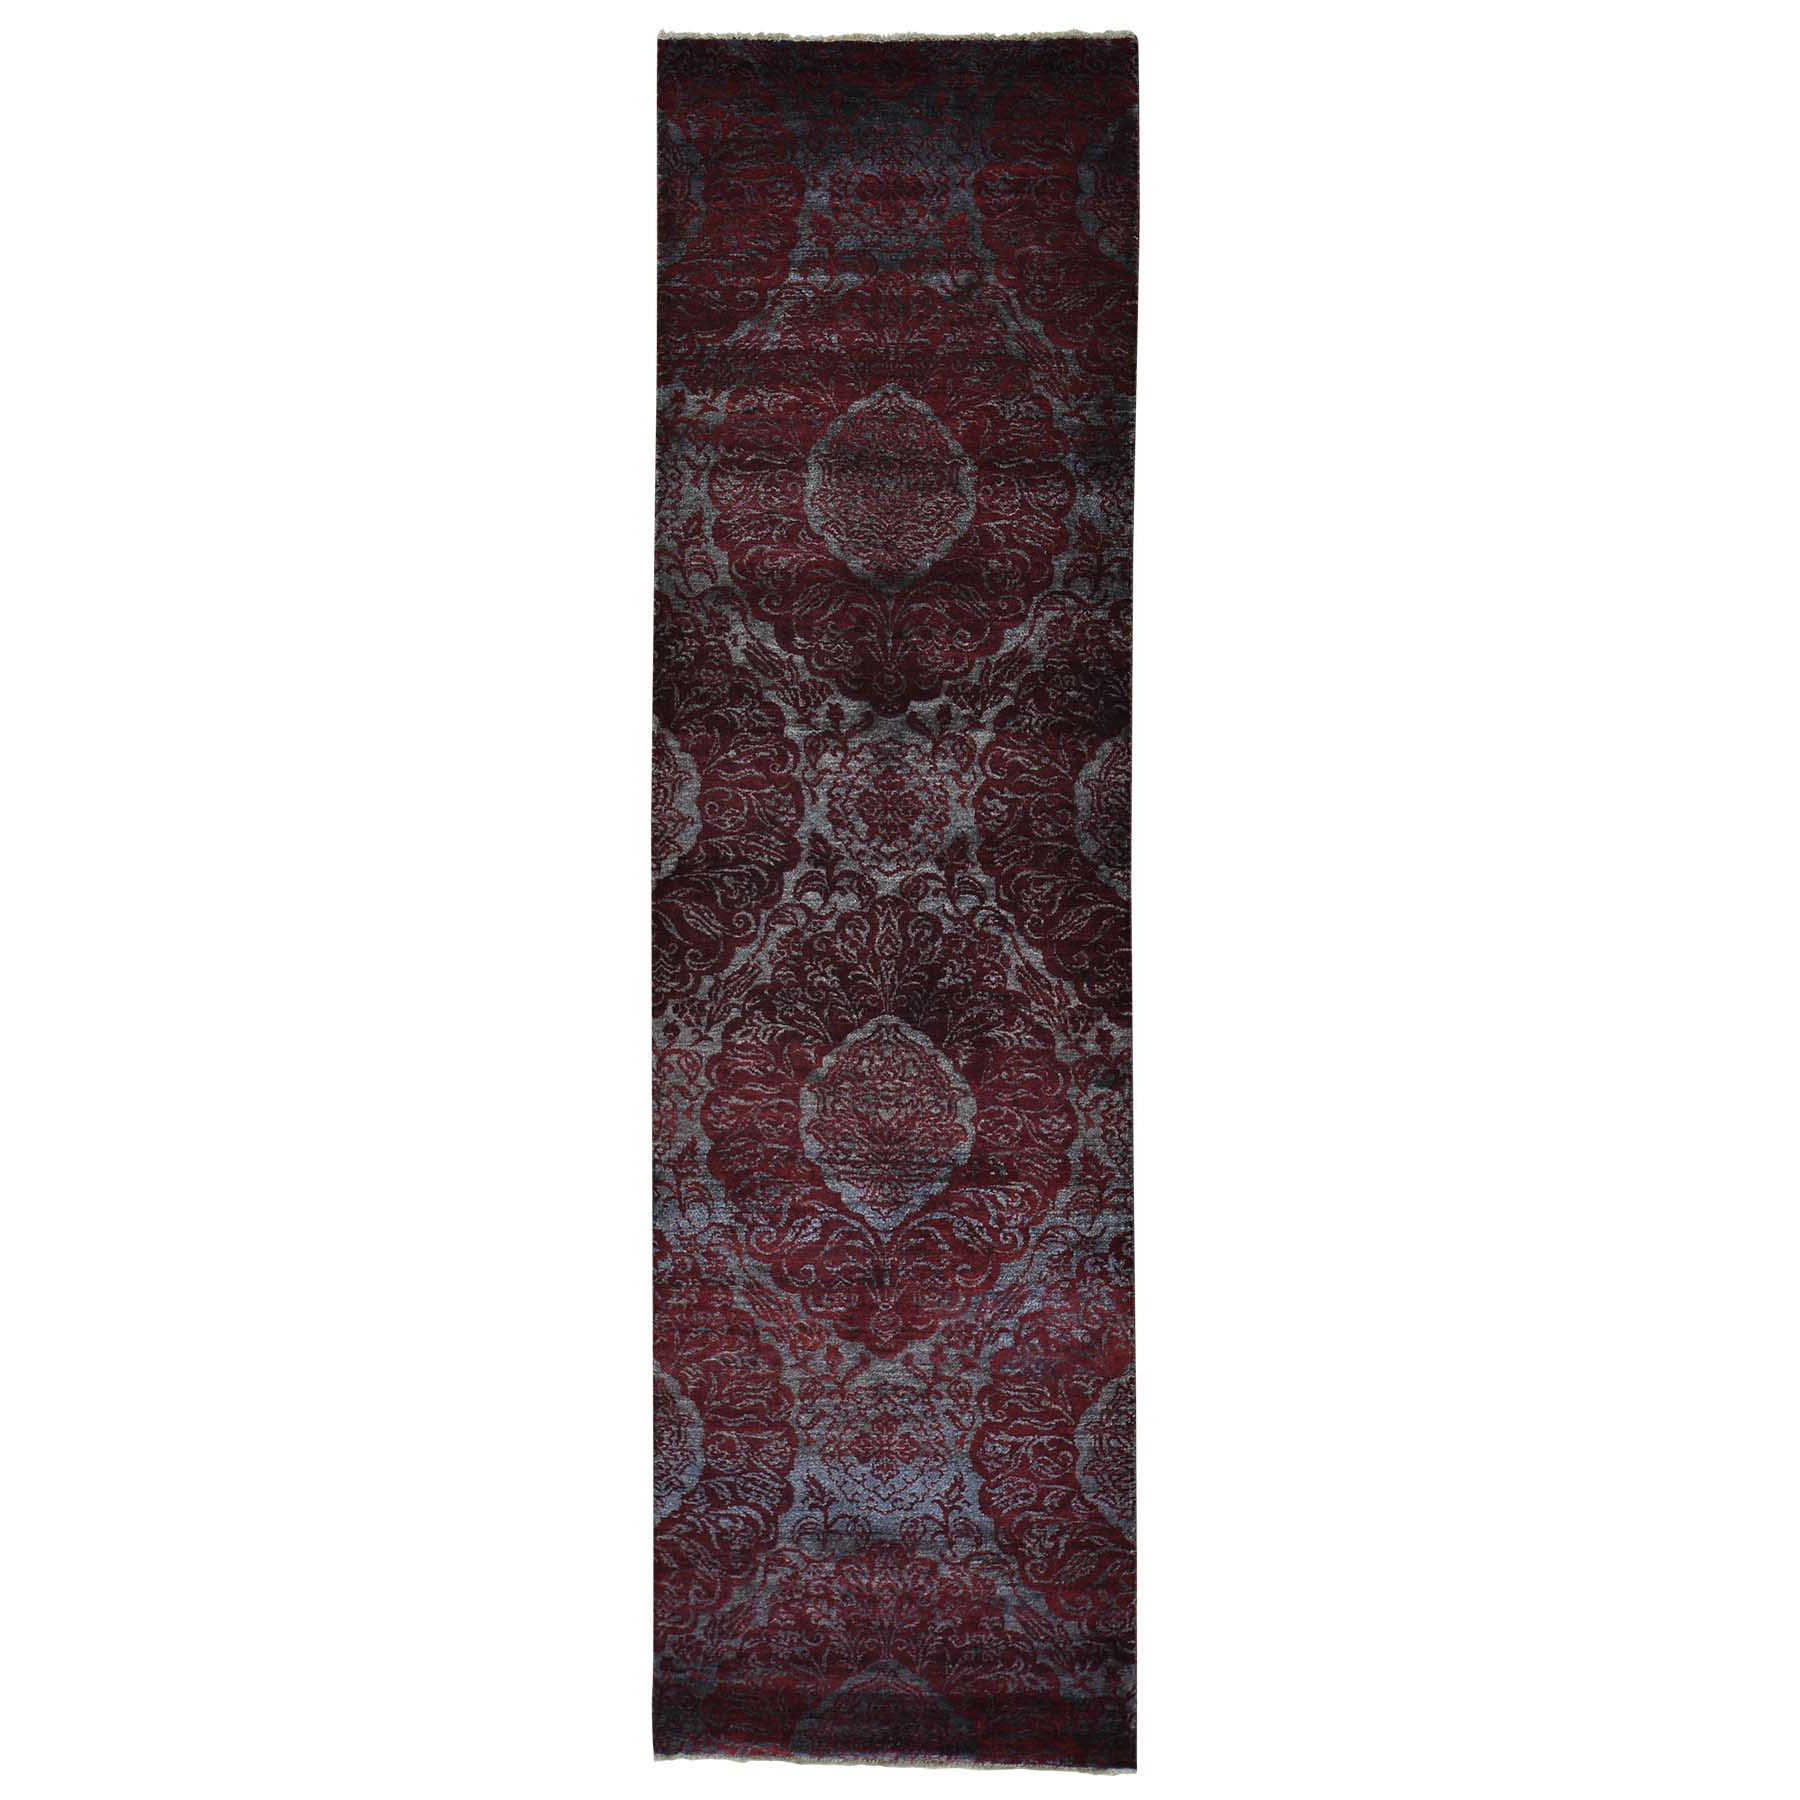 2'9"x9'9" Damask Runner Wool and Silk Tone on Tone Hand Made Oriental Rug 